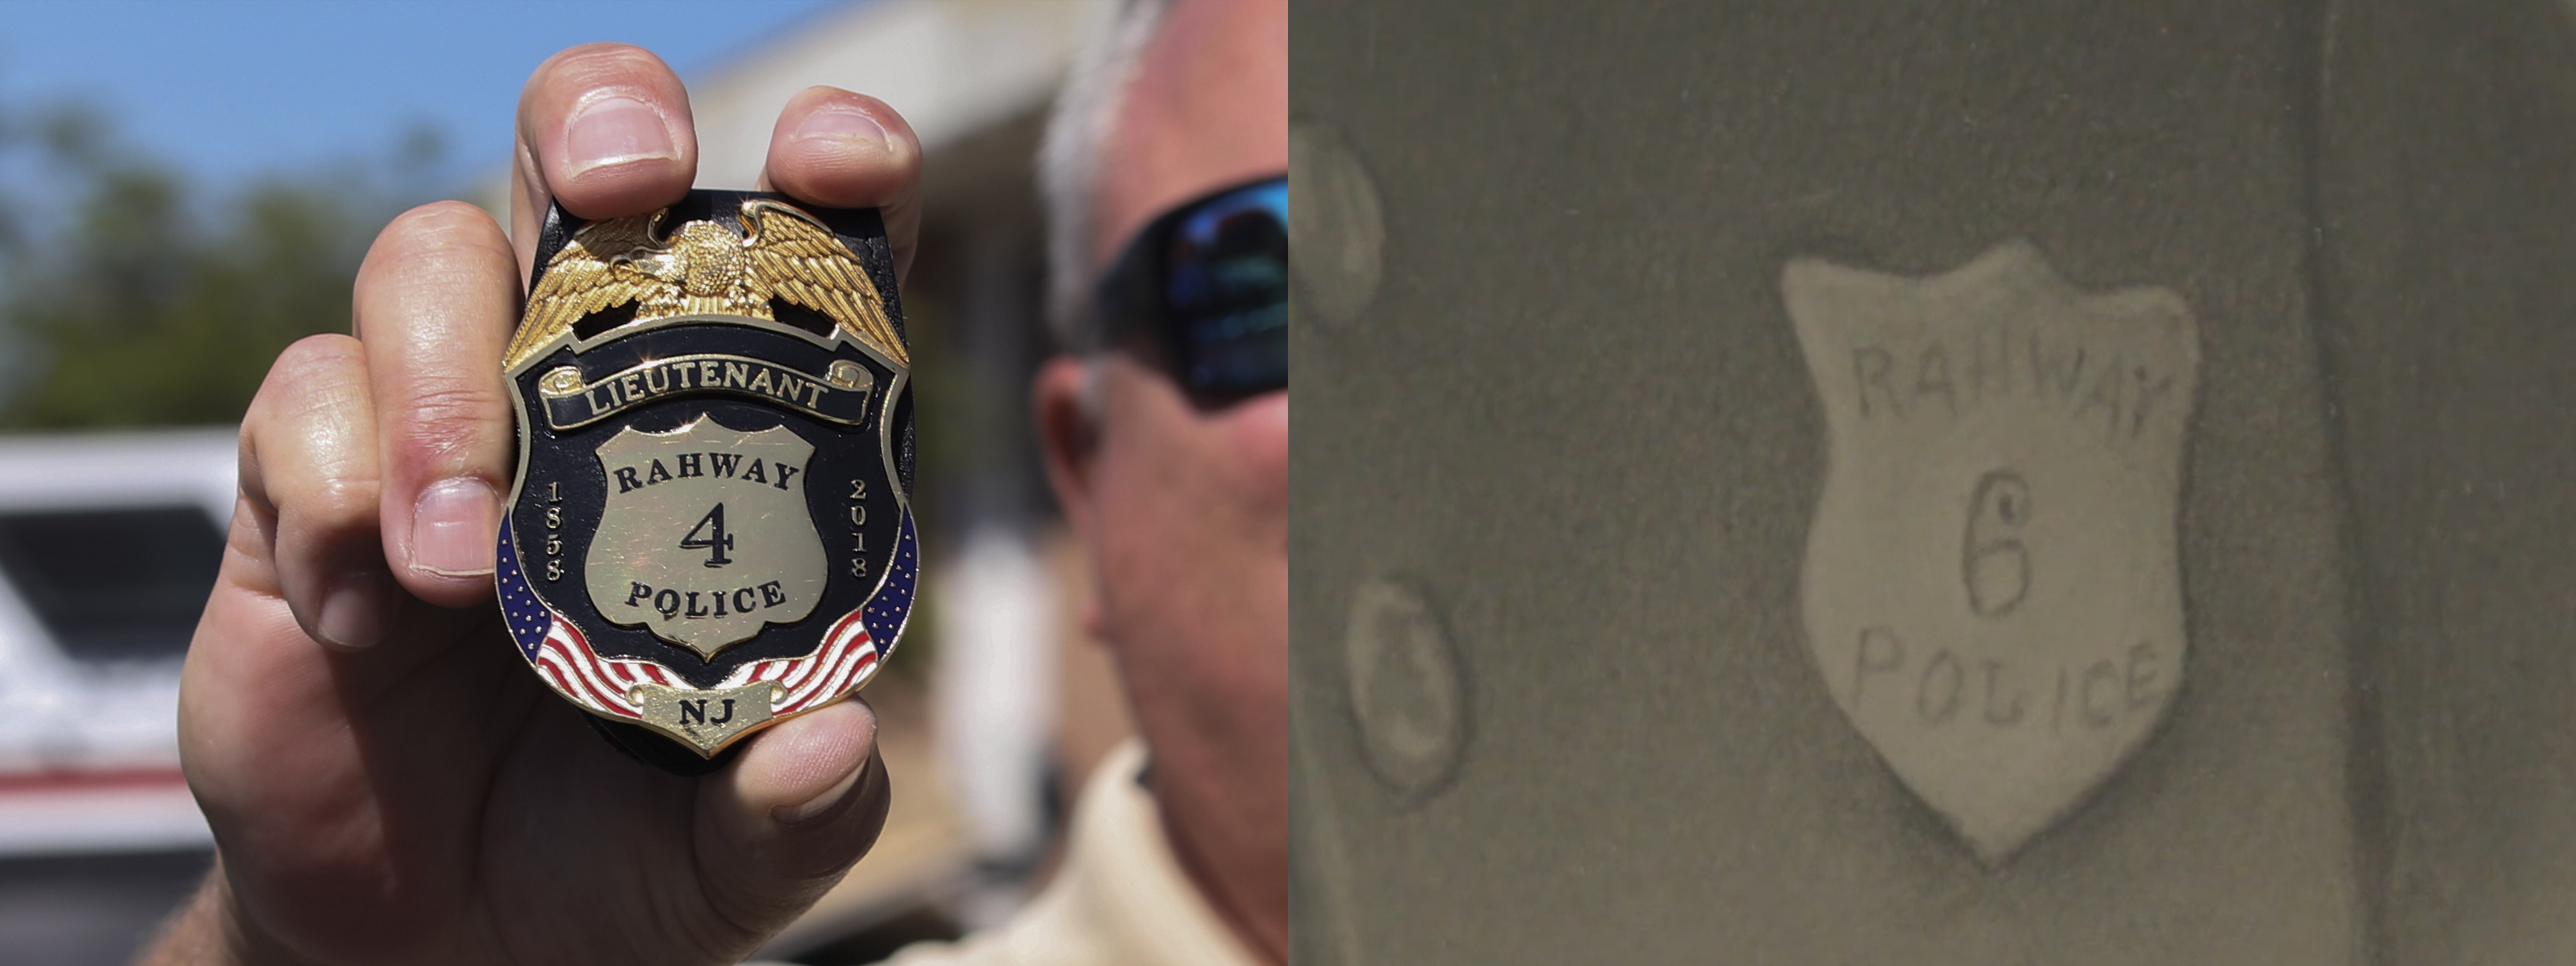 rahway police anniversary badge with old drawing